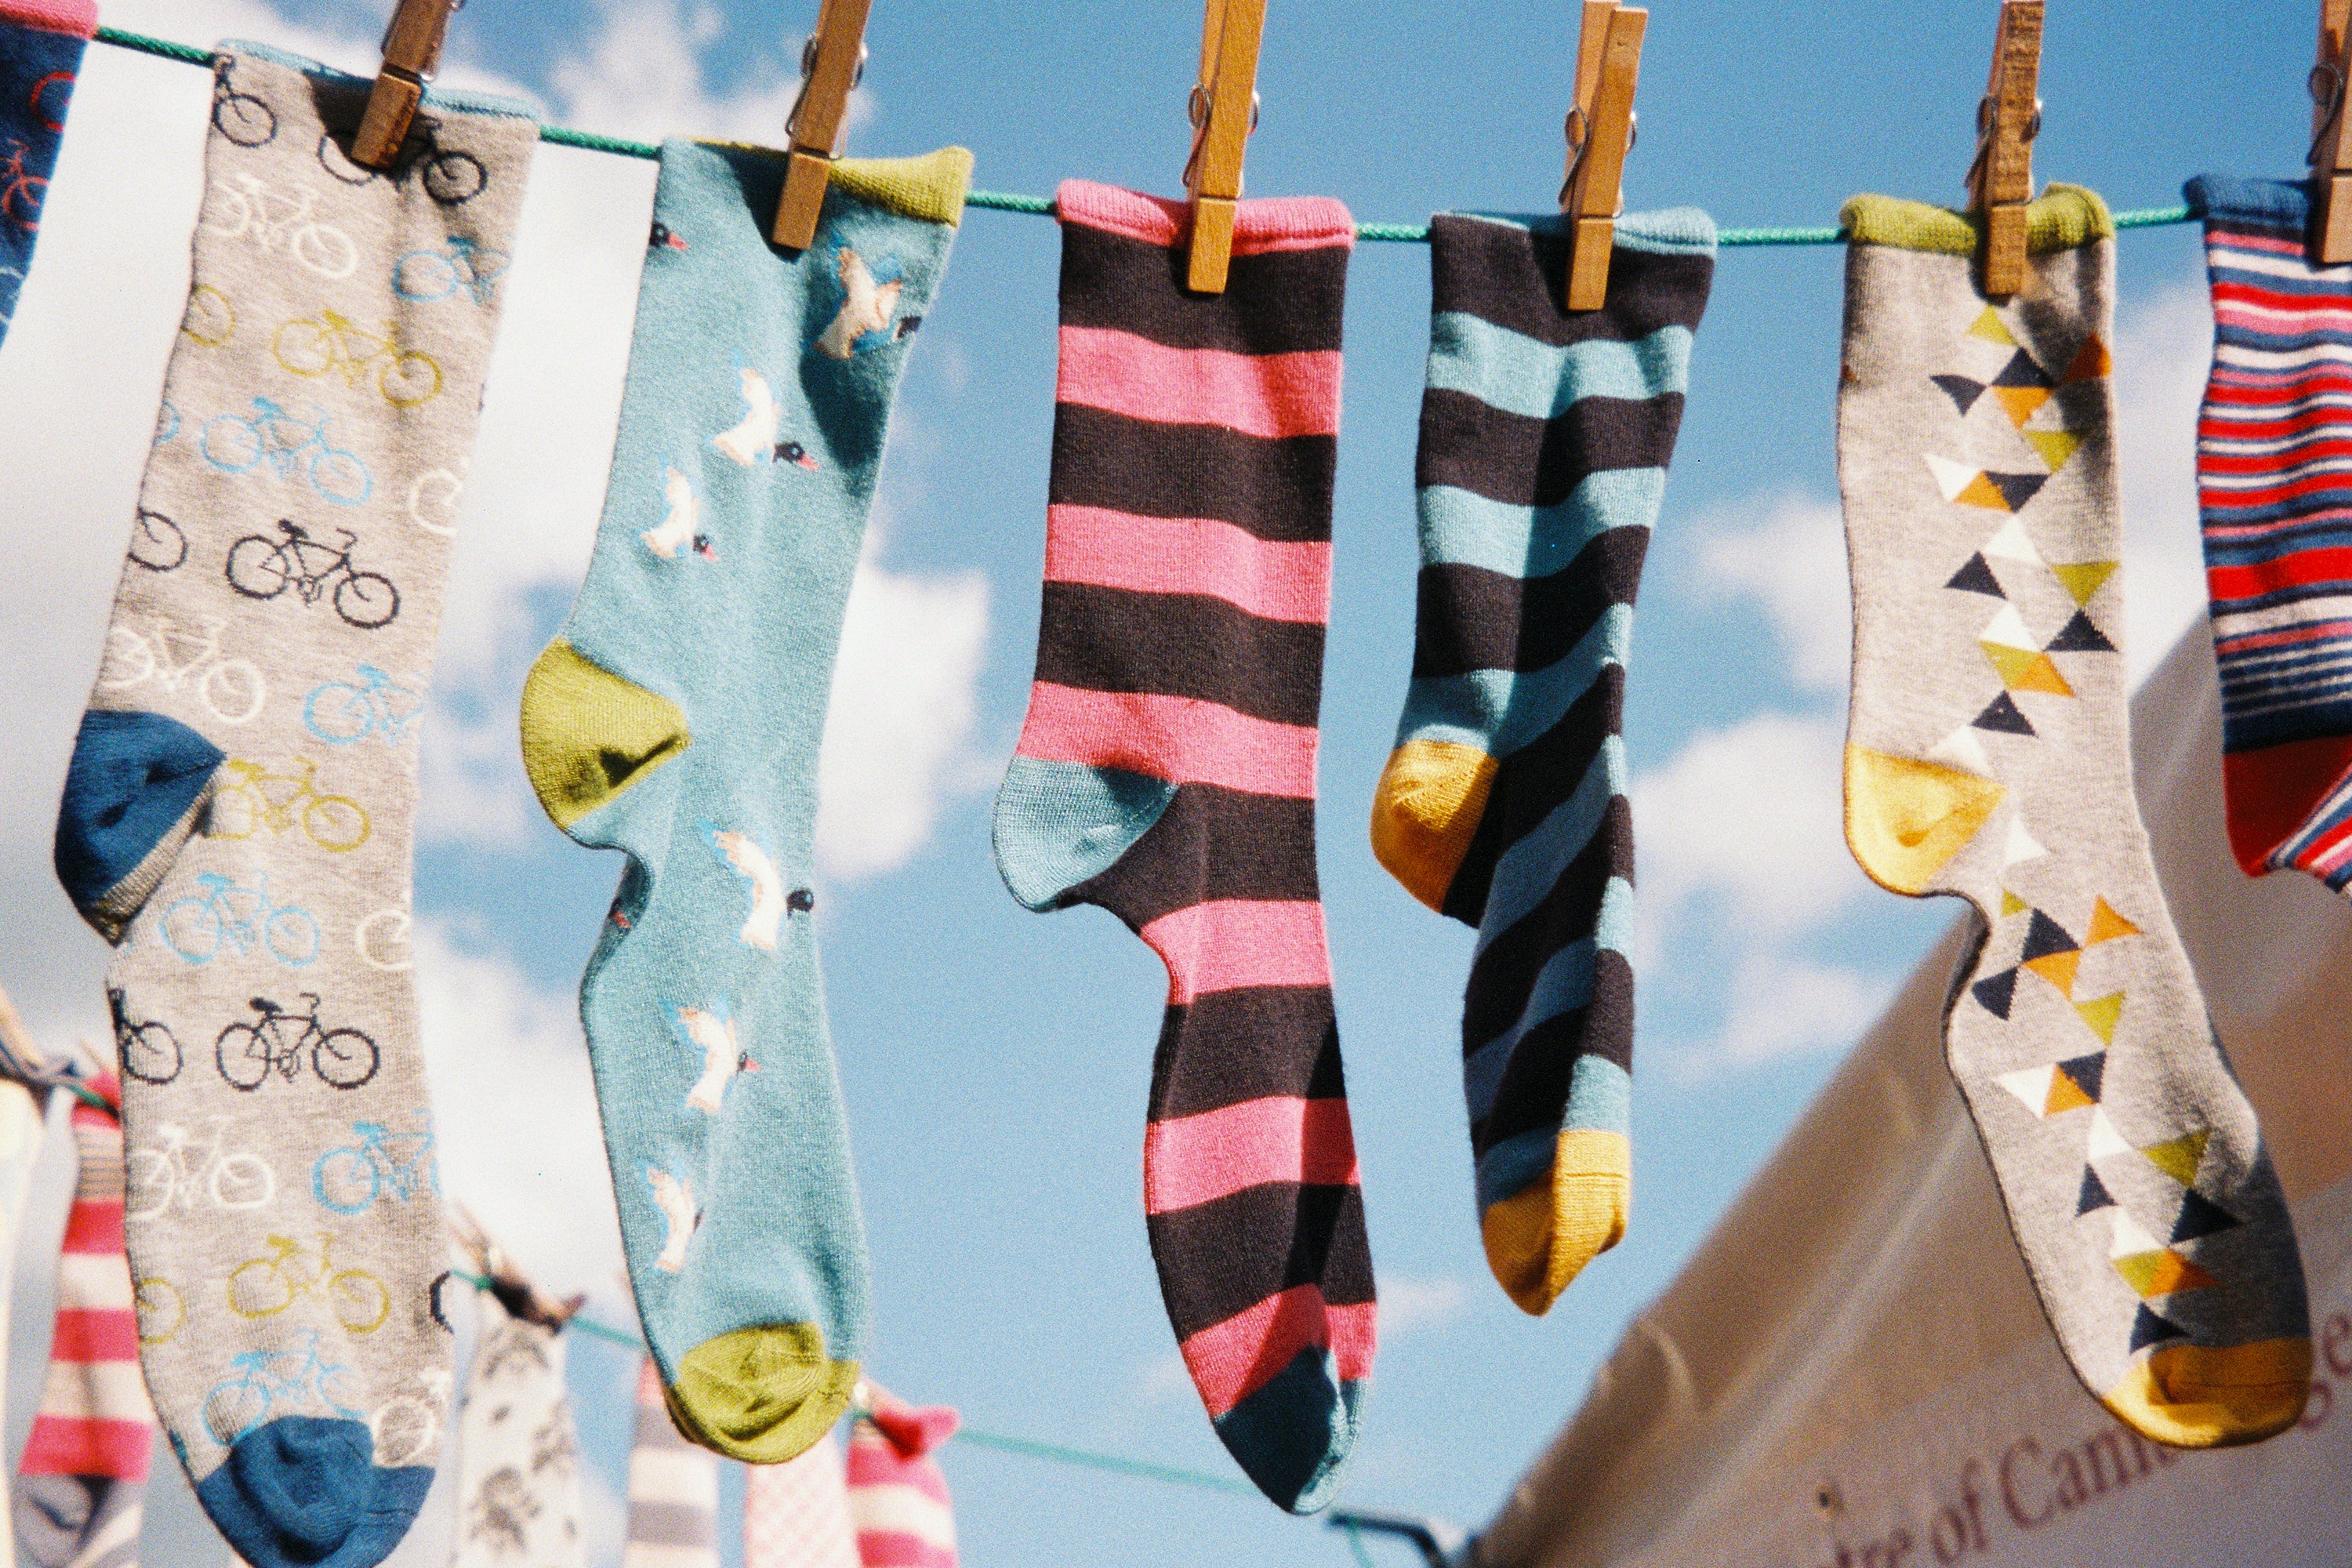 Socks drying outside on the washing line